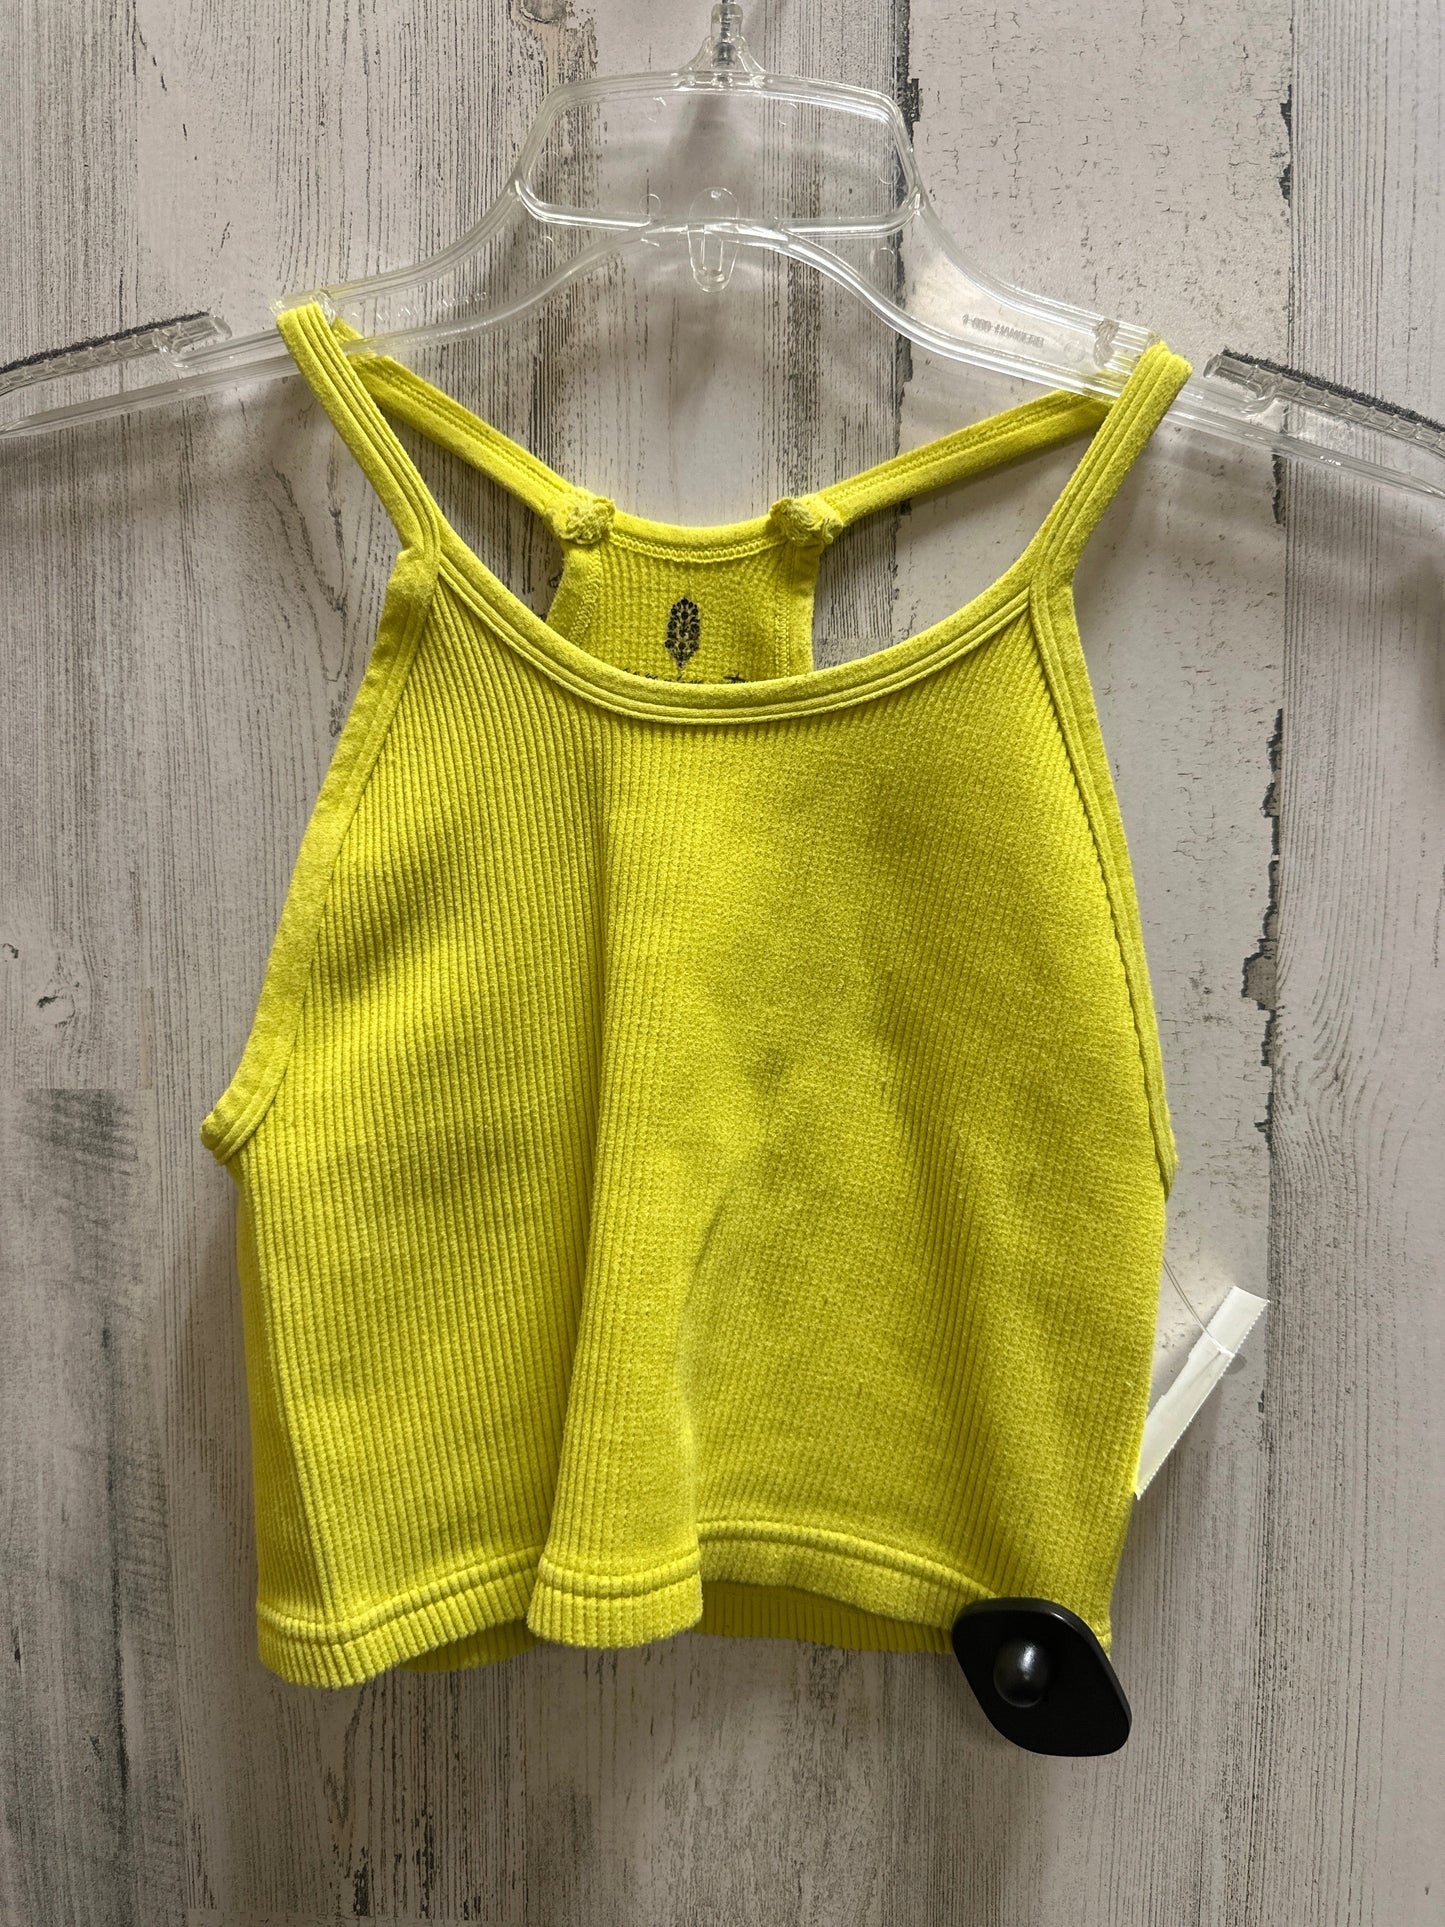 Yellow Athletic Shorts 2 Pc Free People, Size Xs